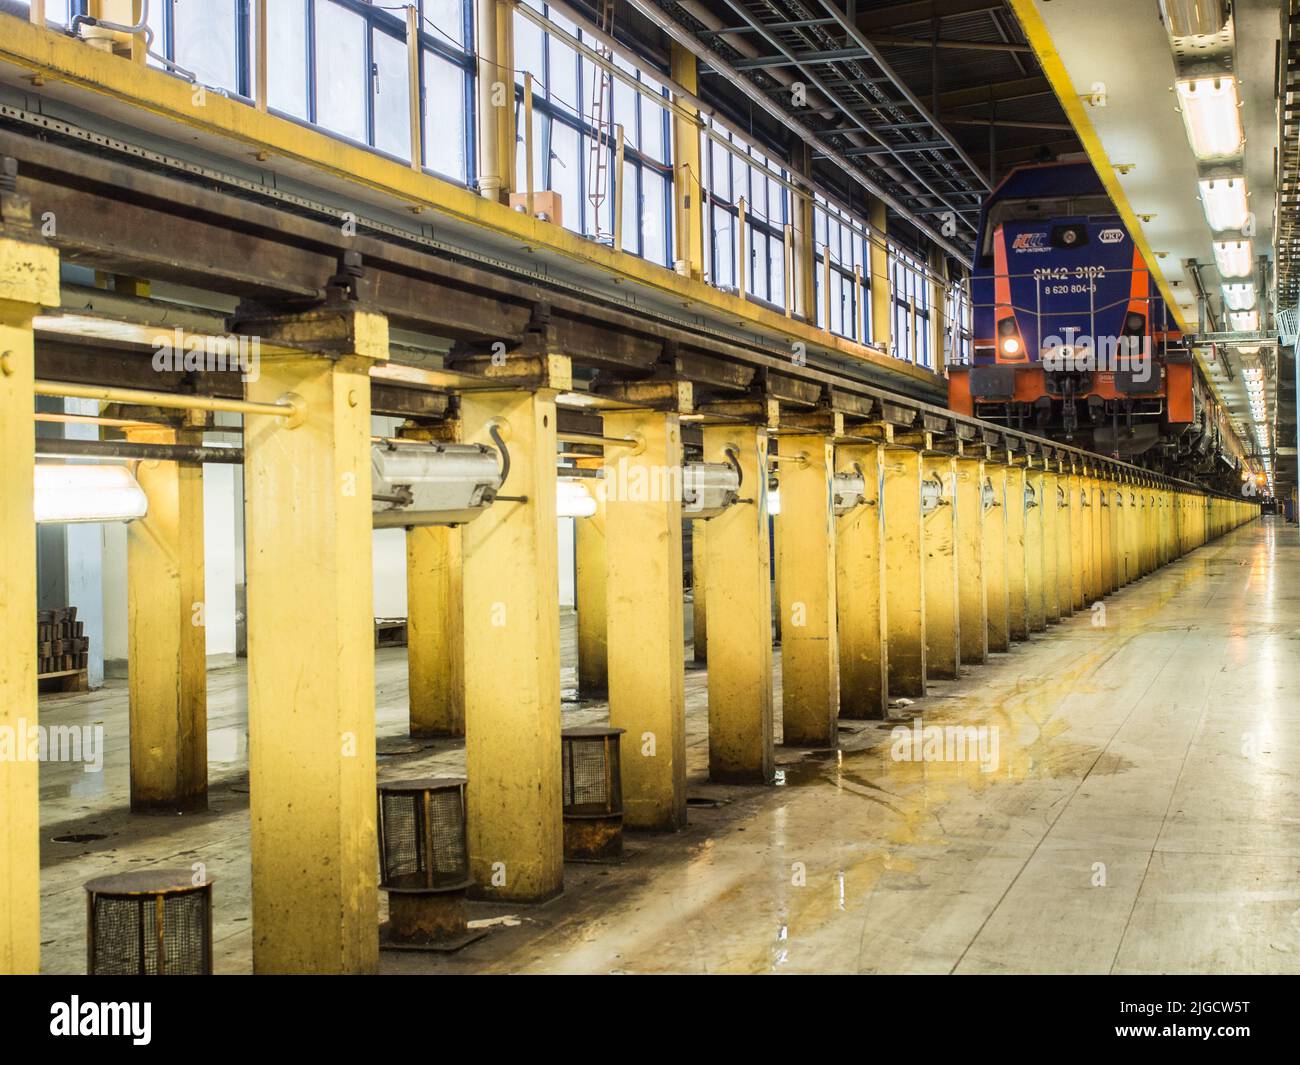 Warsaw, Poland - October 20, 2017: Train inside depot. Area for maintenance, repair and service of passenger trains and wagons Stock Photo